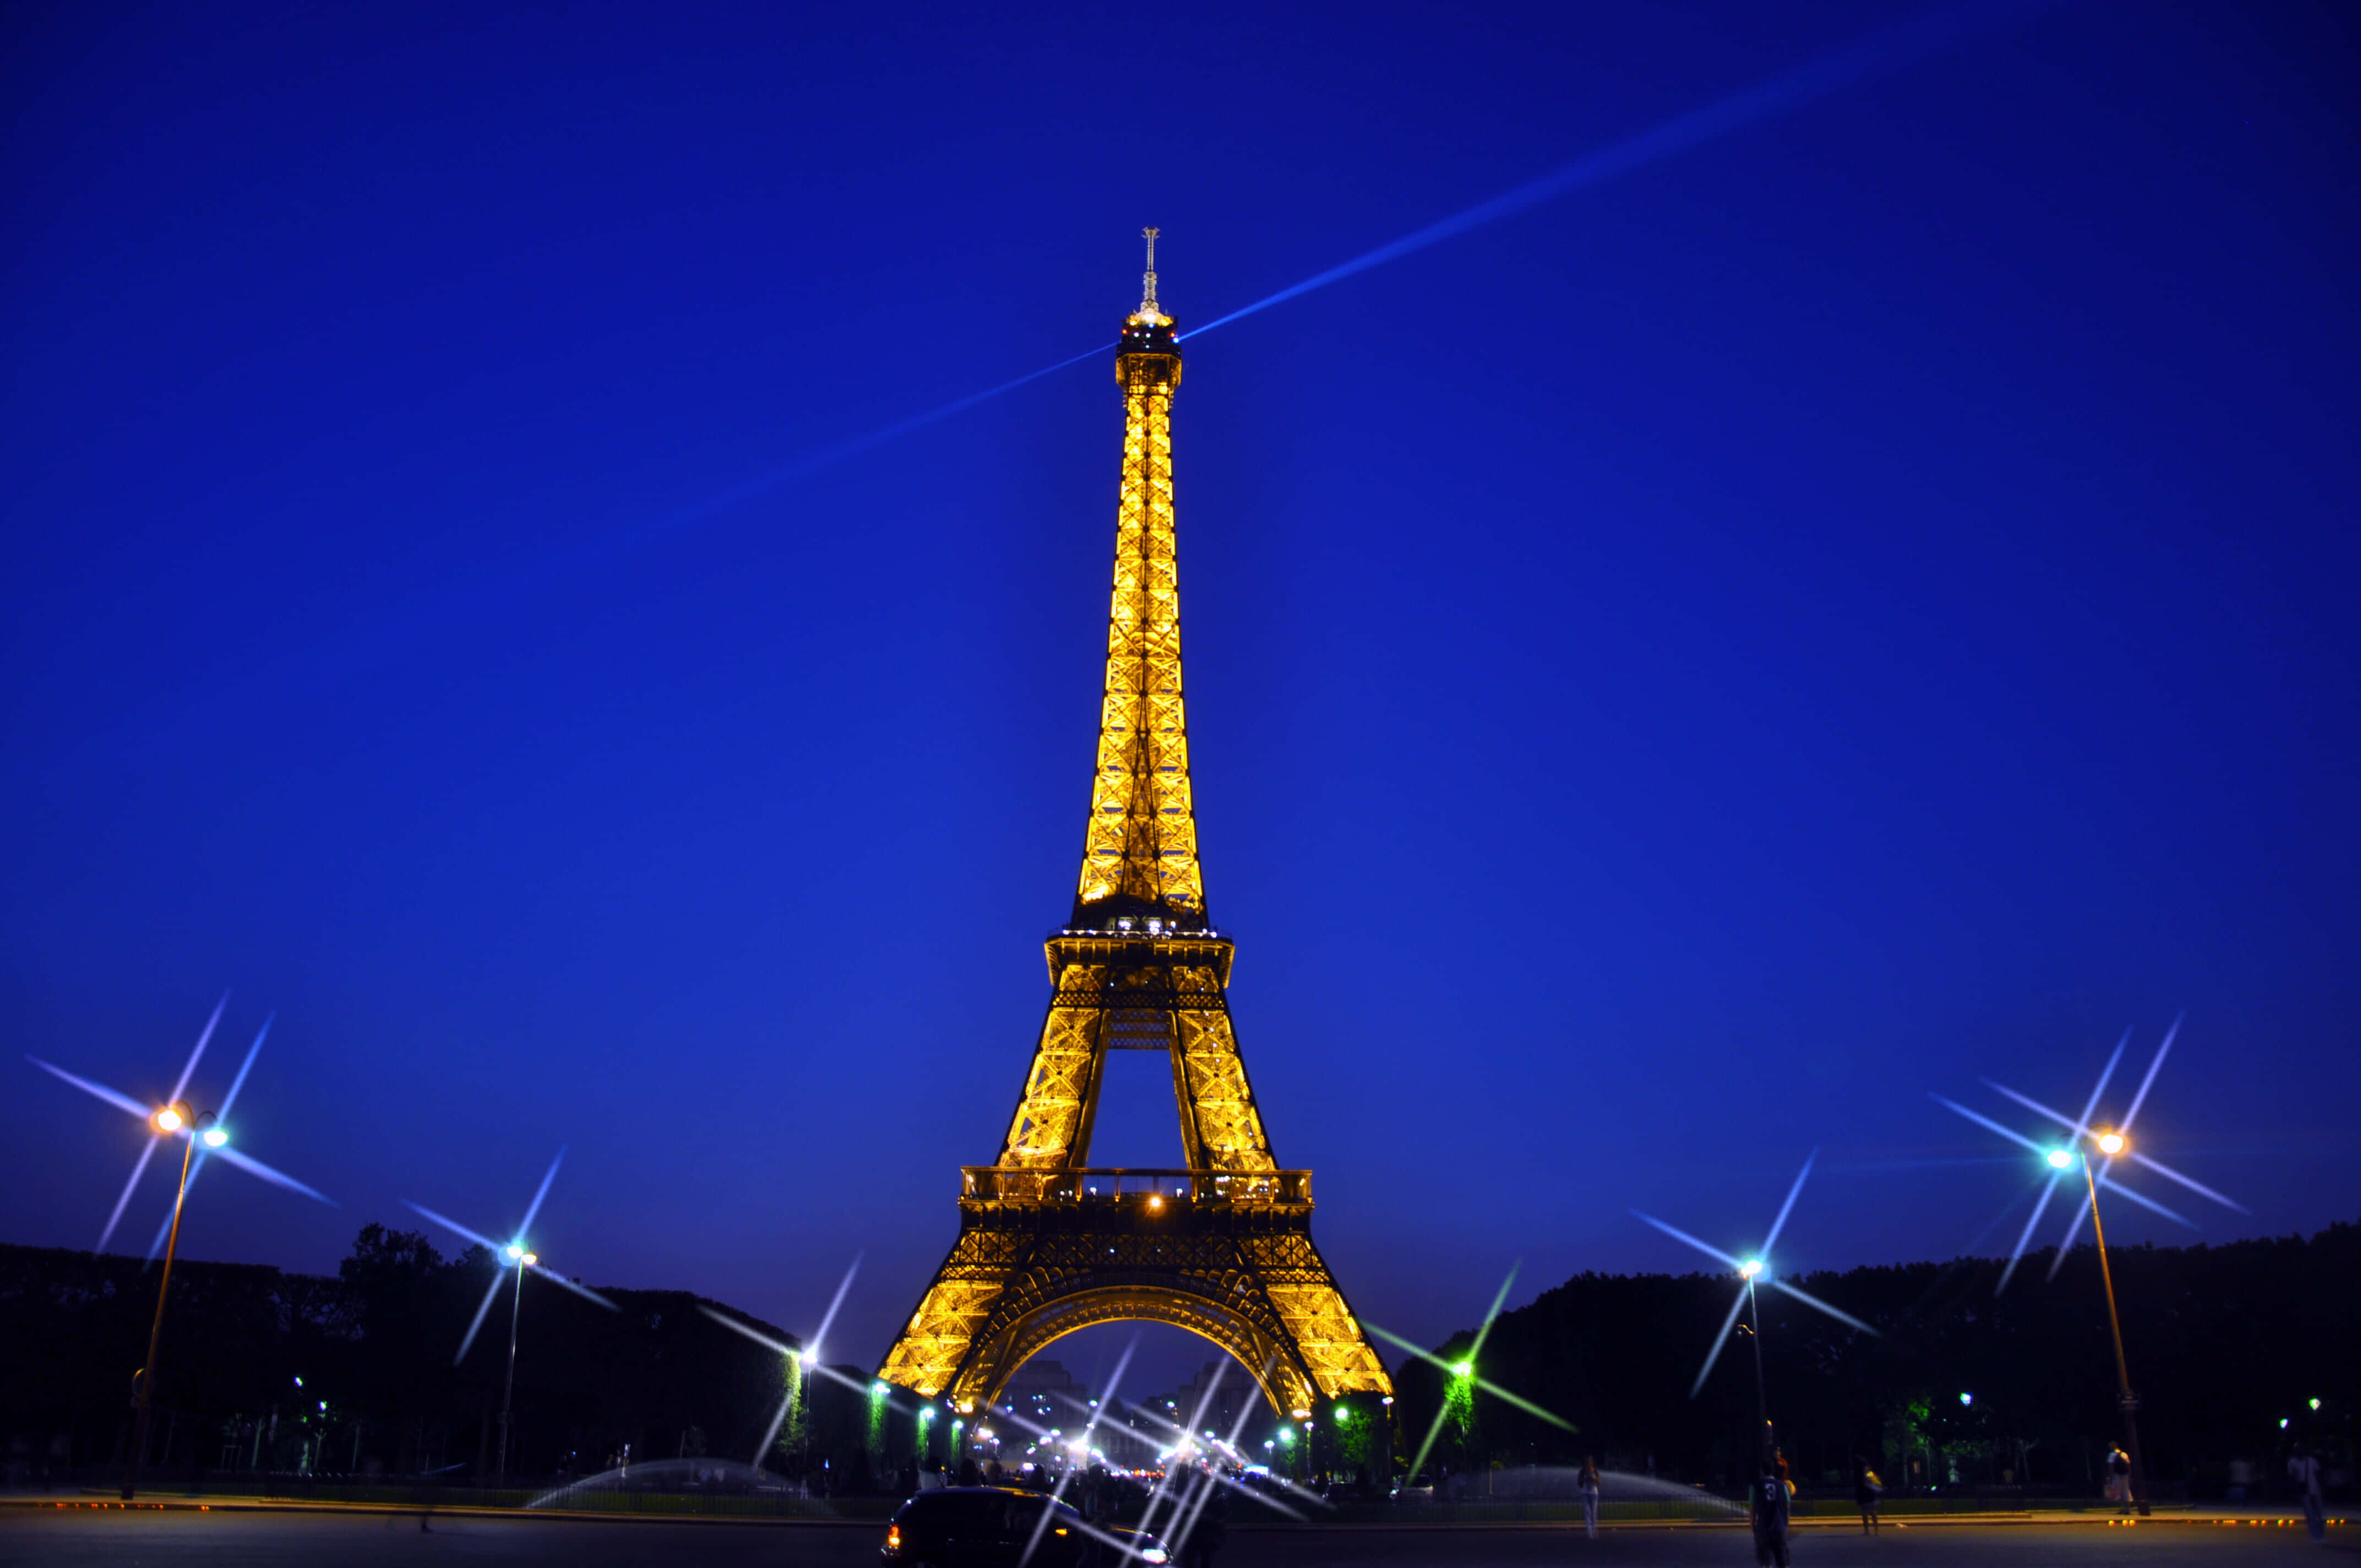 Marvel at the breathtaking view of the Eiffel Tower illuminated in the night.